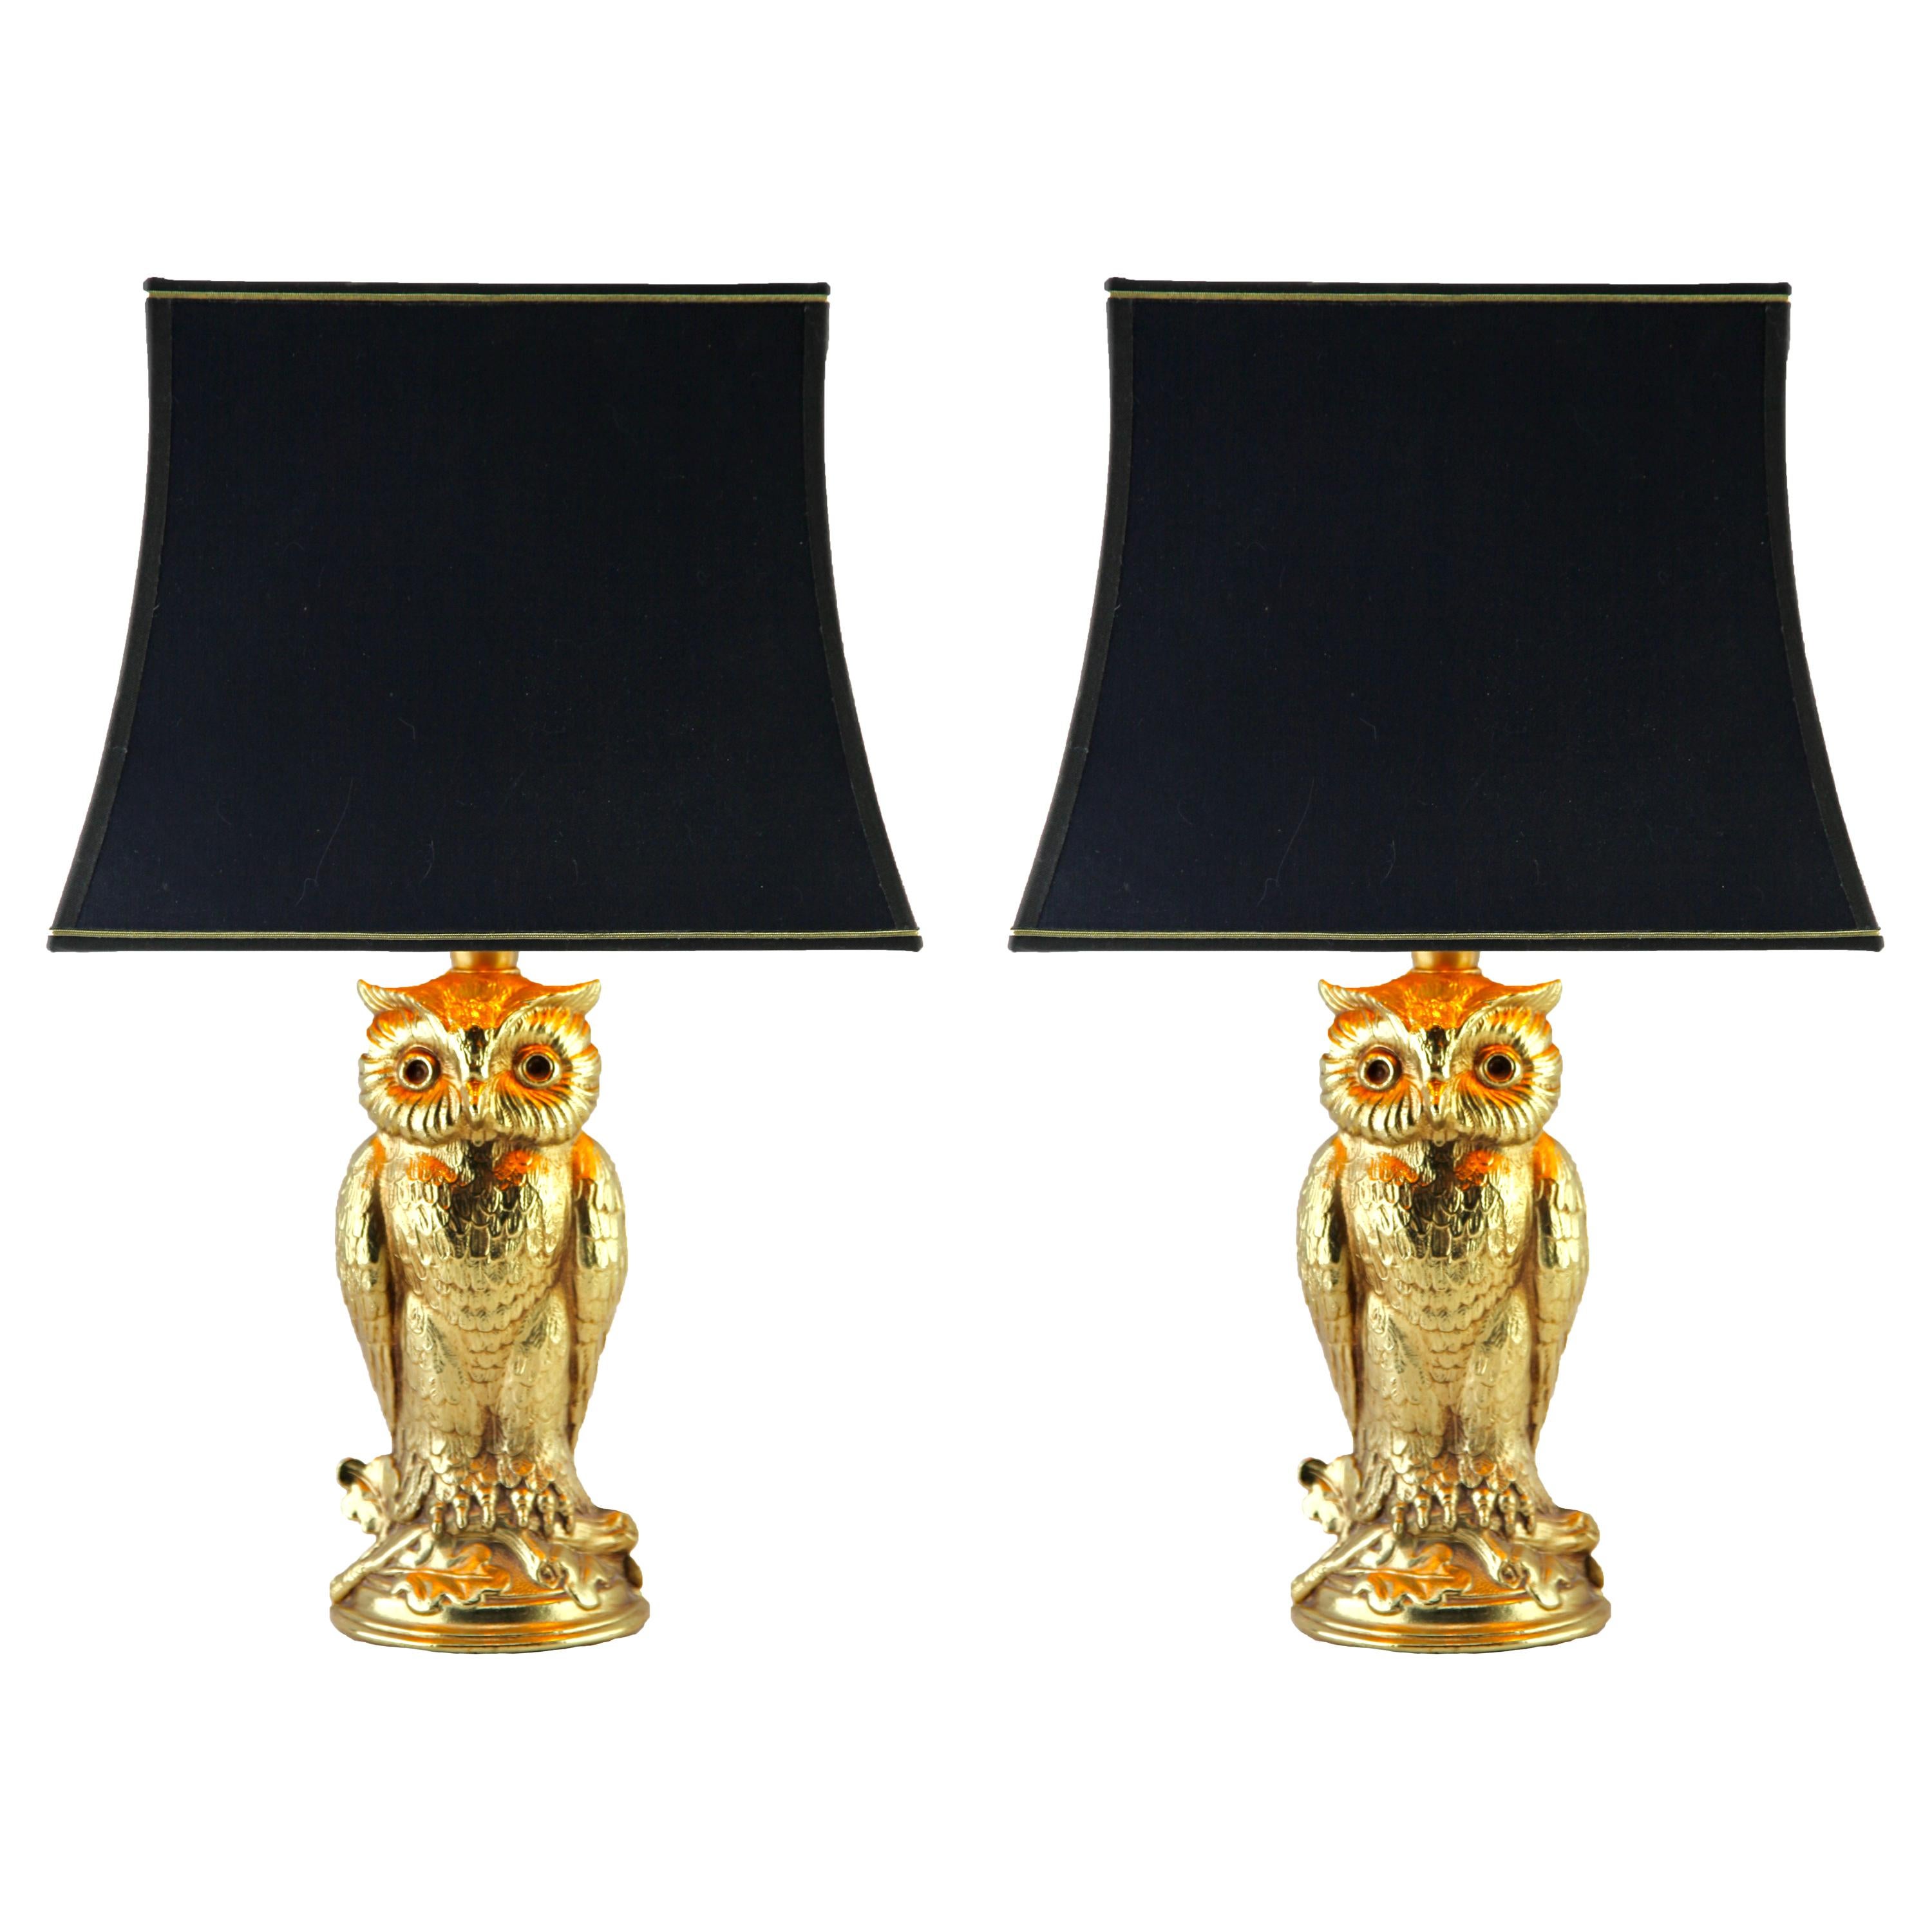 Brass Pair of Owl Table Lamps from Loevsky & Loevsky, 1960s